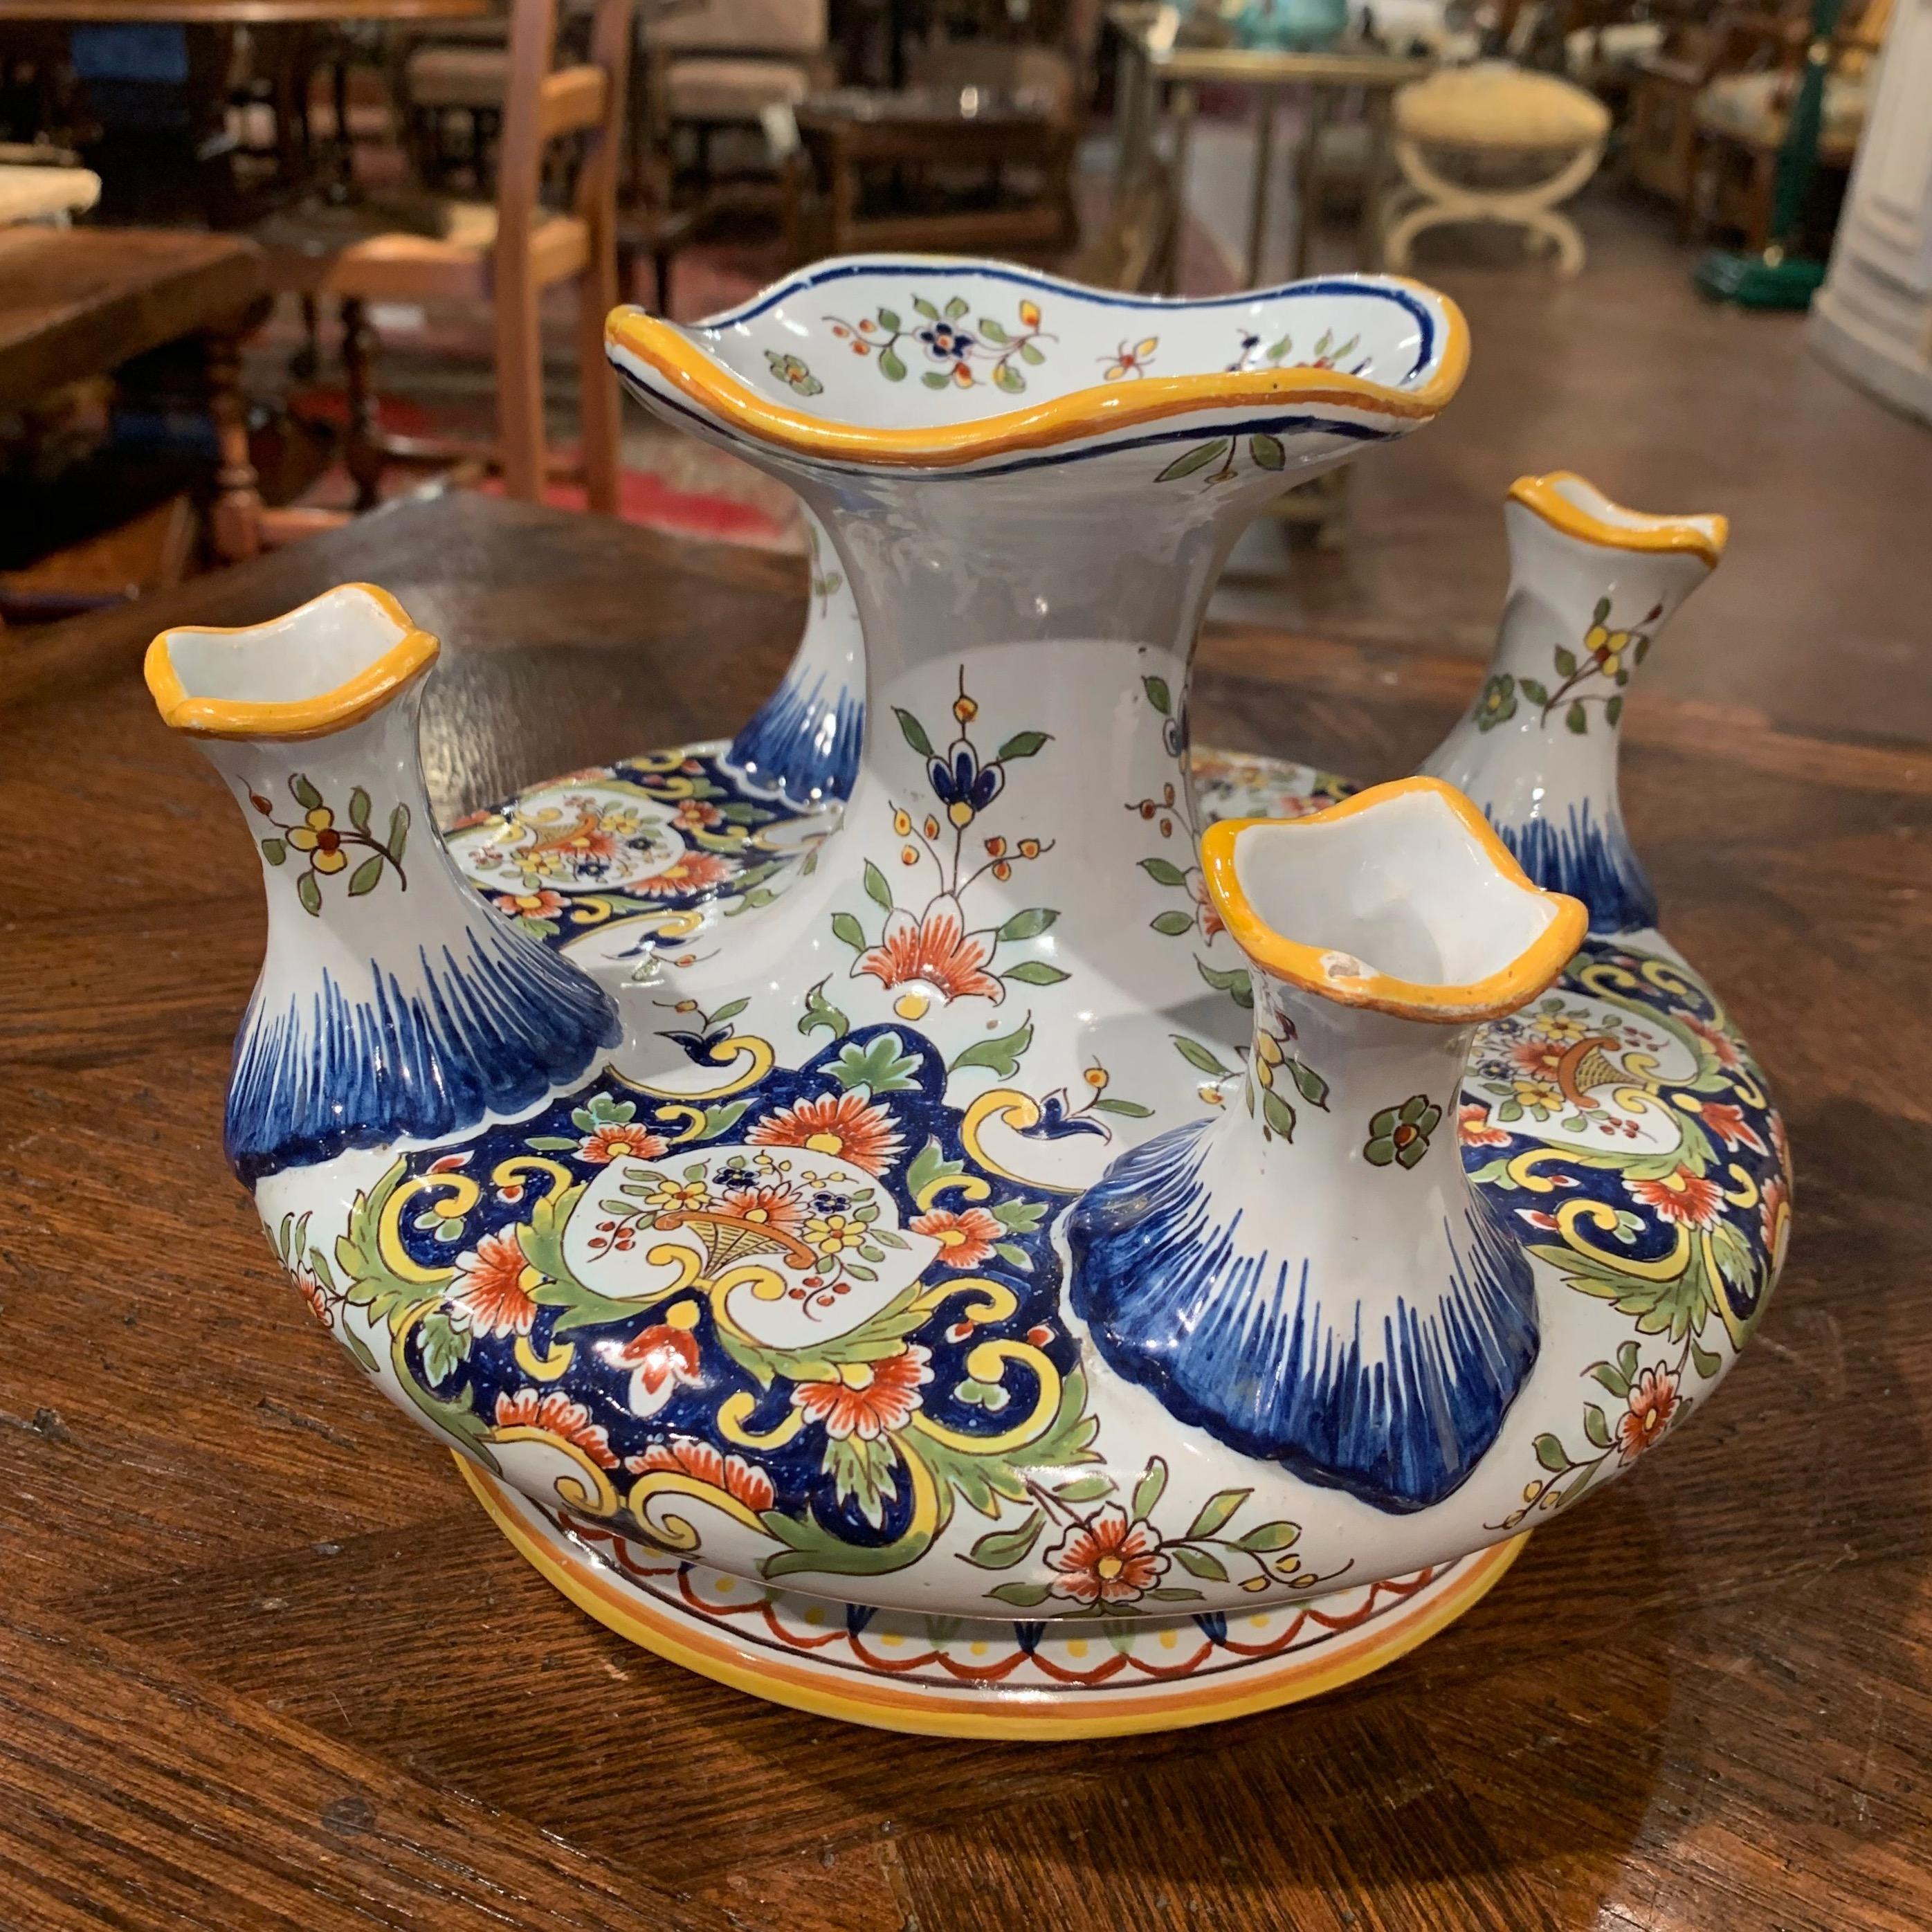 Place this interesting antique ceramic vase on a shelf or entry commode, crafted in Normandy, France, circa 1900, the Classic planter is round in shape with scalloped rims, and features five entrances for flowers including a larger one in the